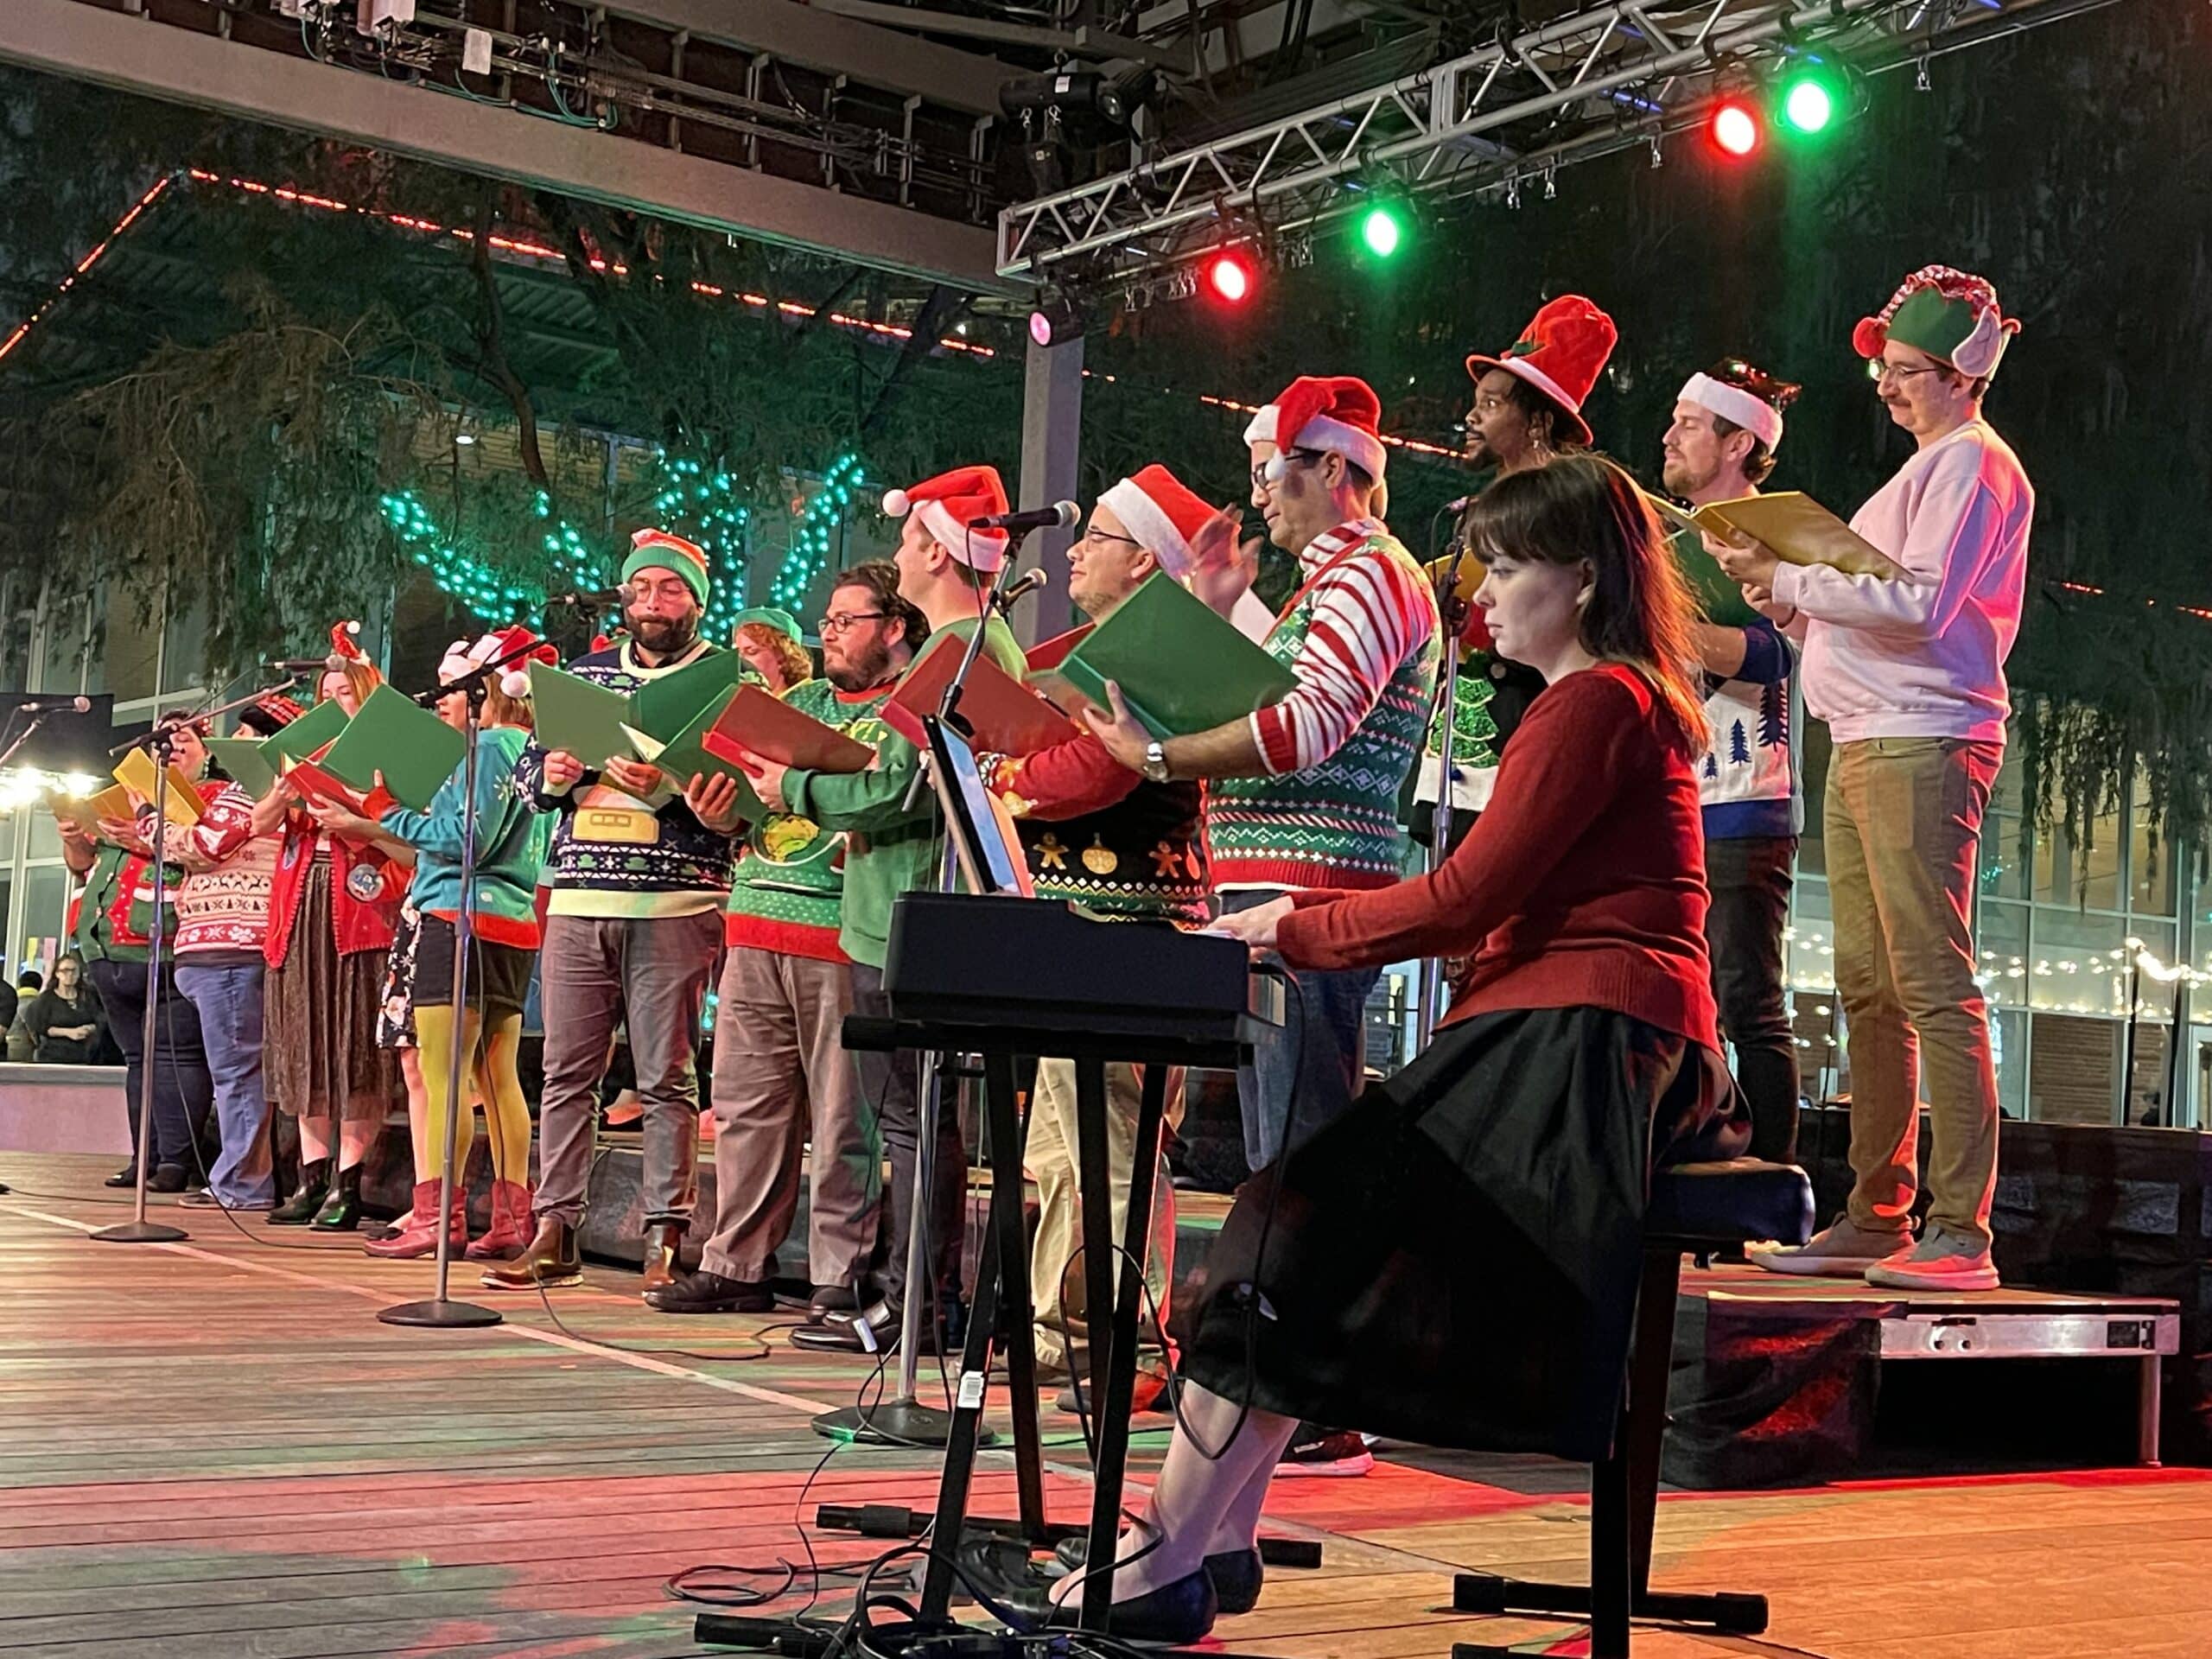 Carols on the Green event - carolers on stage performing in holiday attire